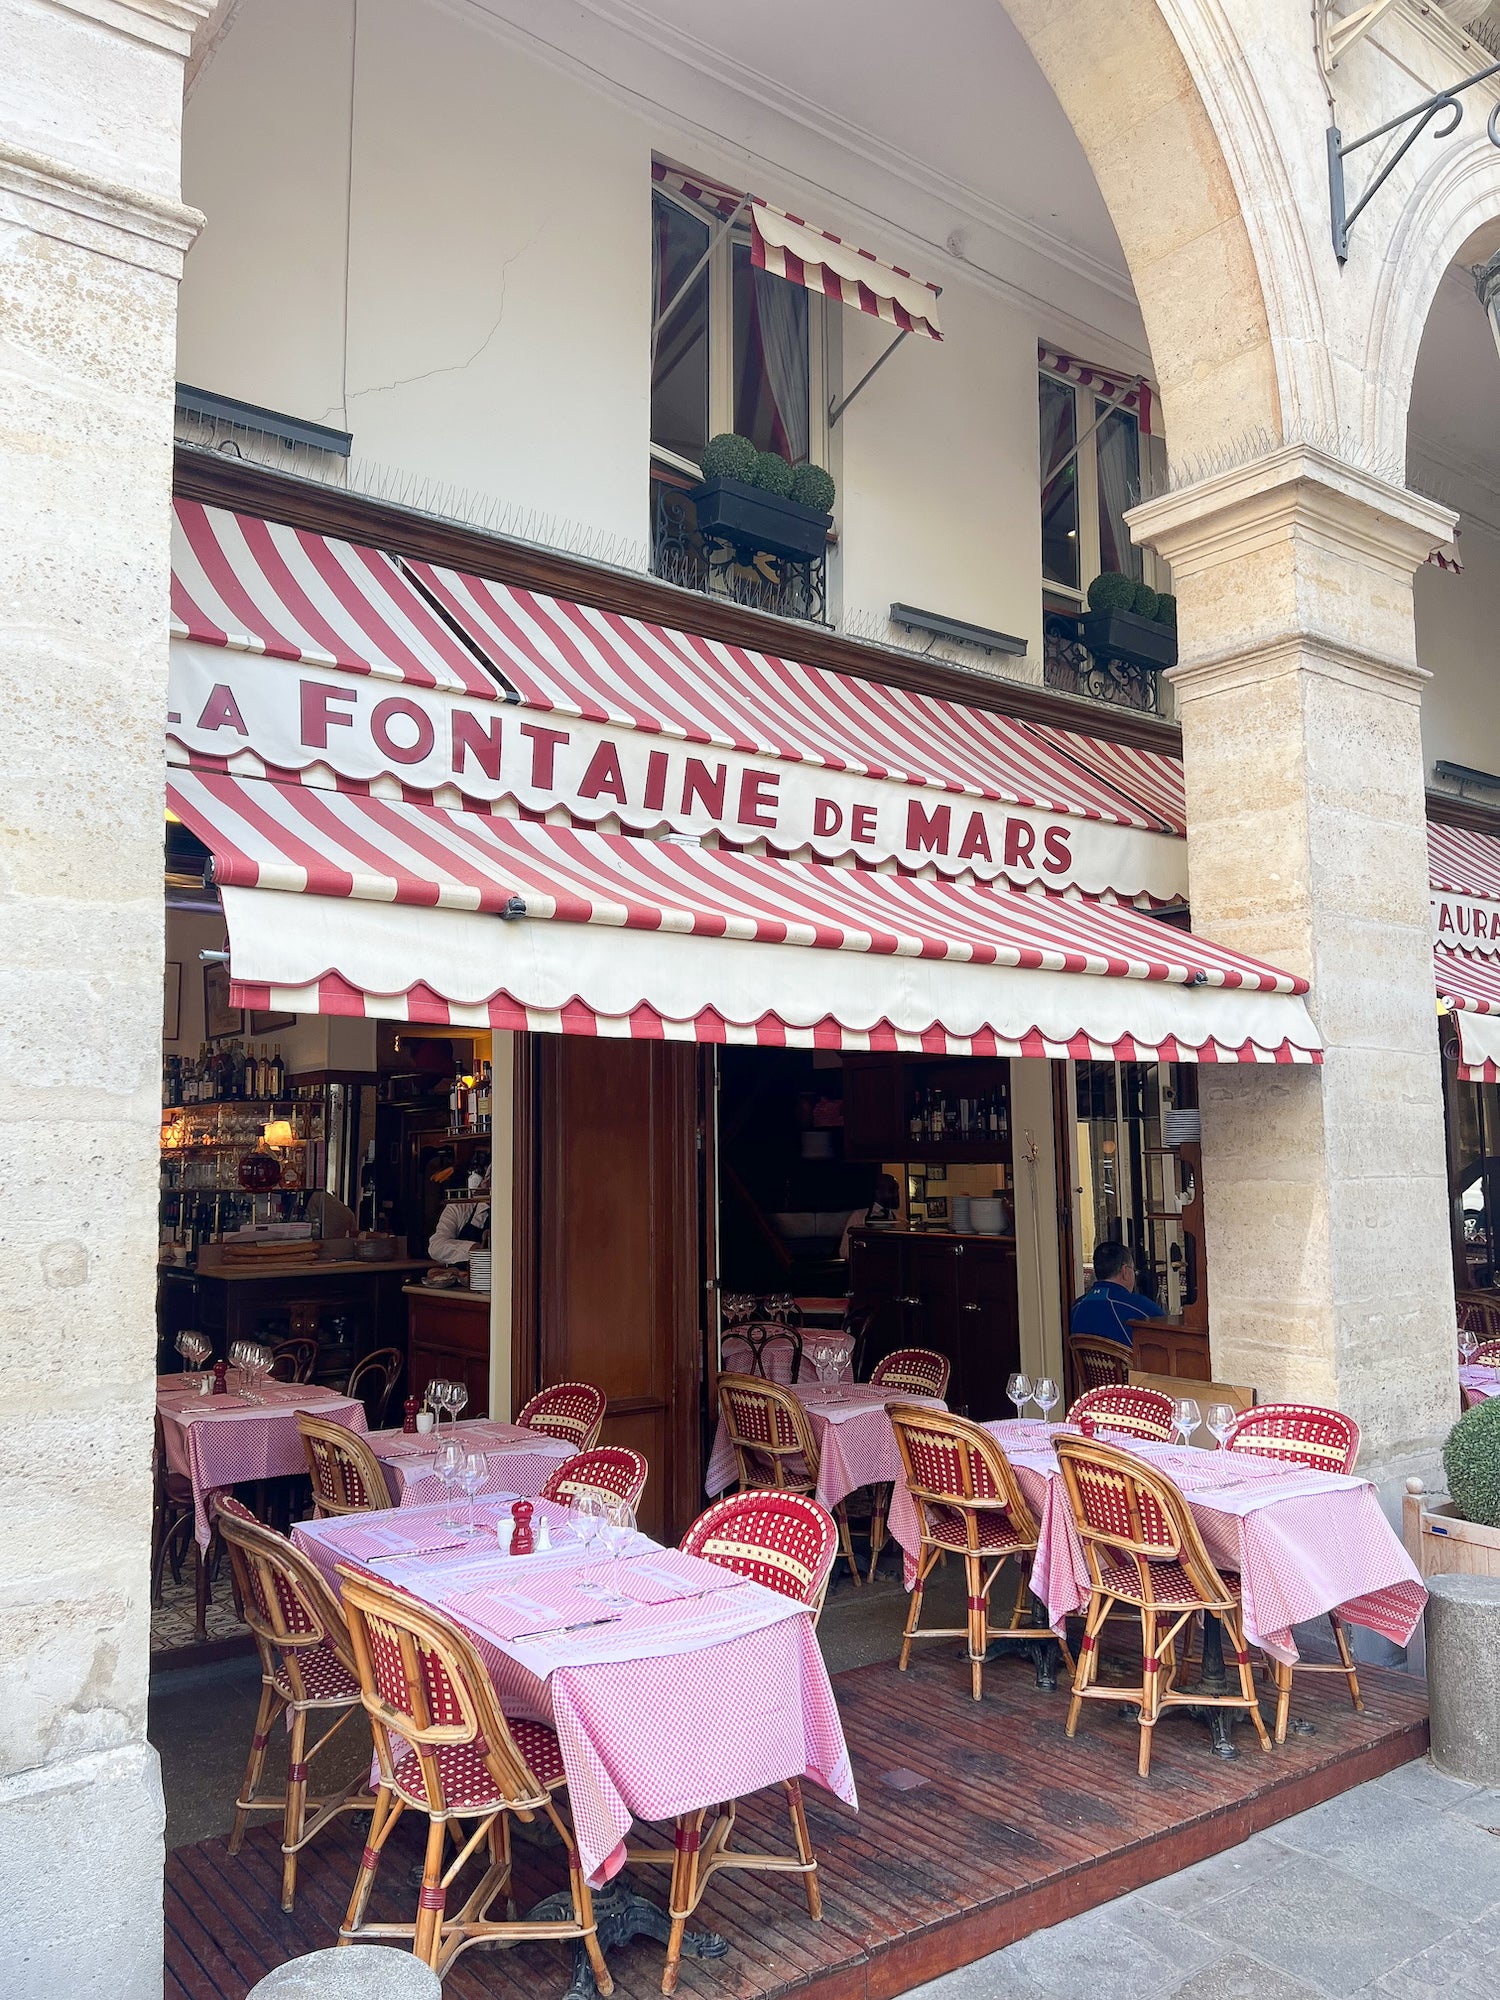 Travelling tips - Family journey to France - Paris with children what to visit and where to shop La Fontaine de Mars French bistrot